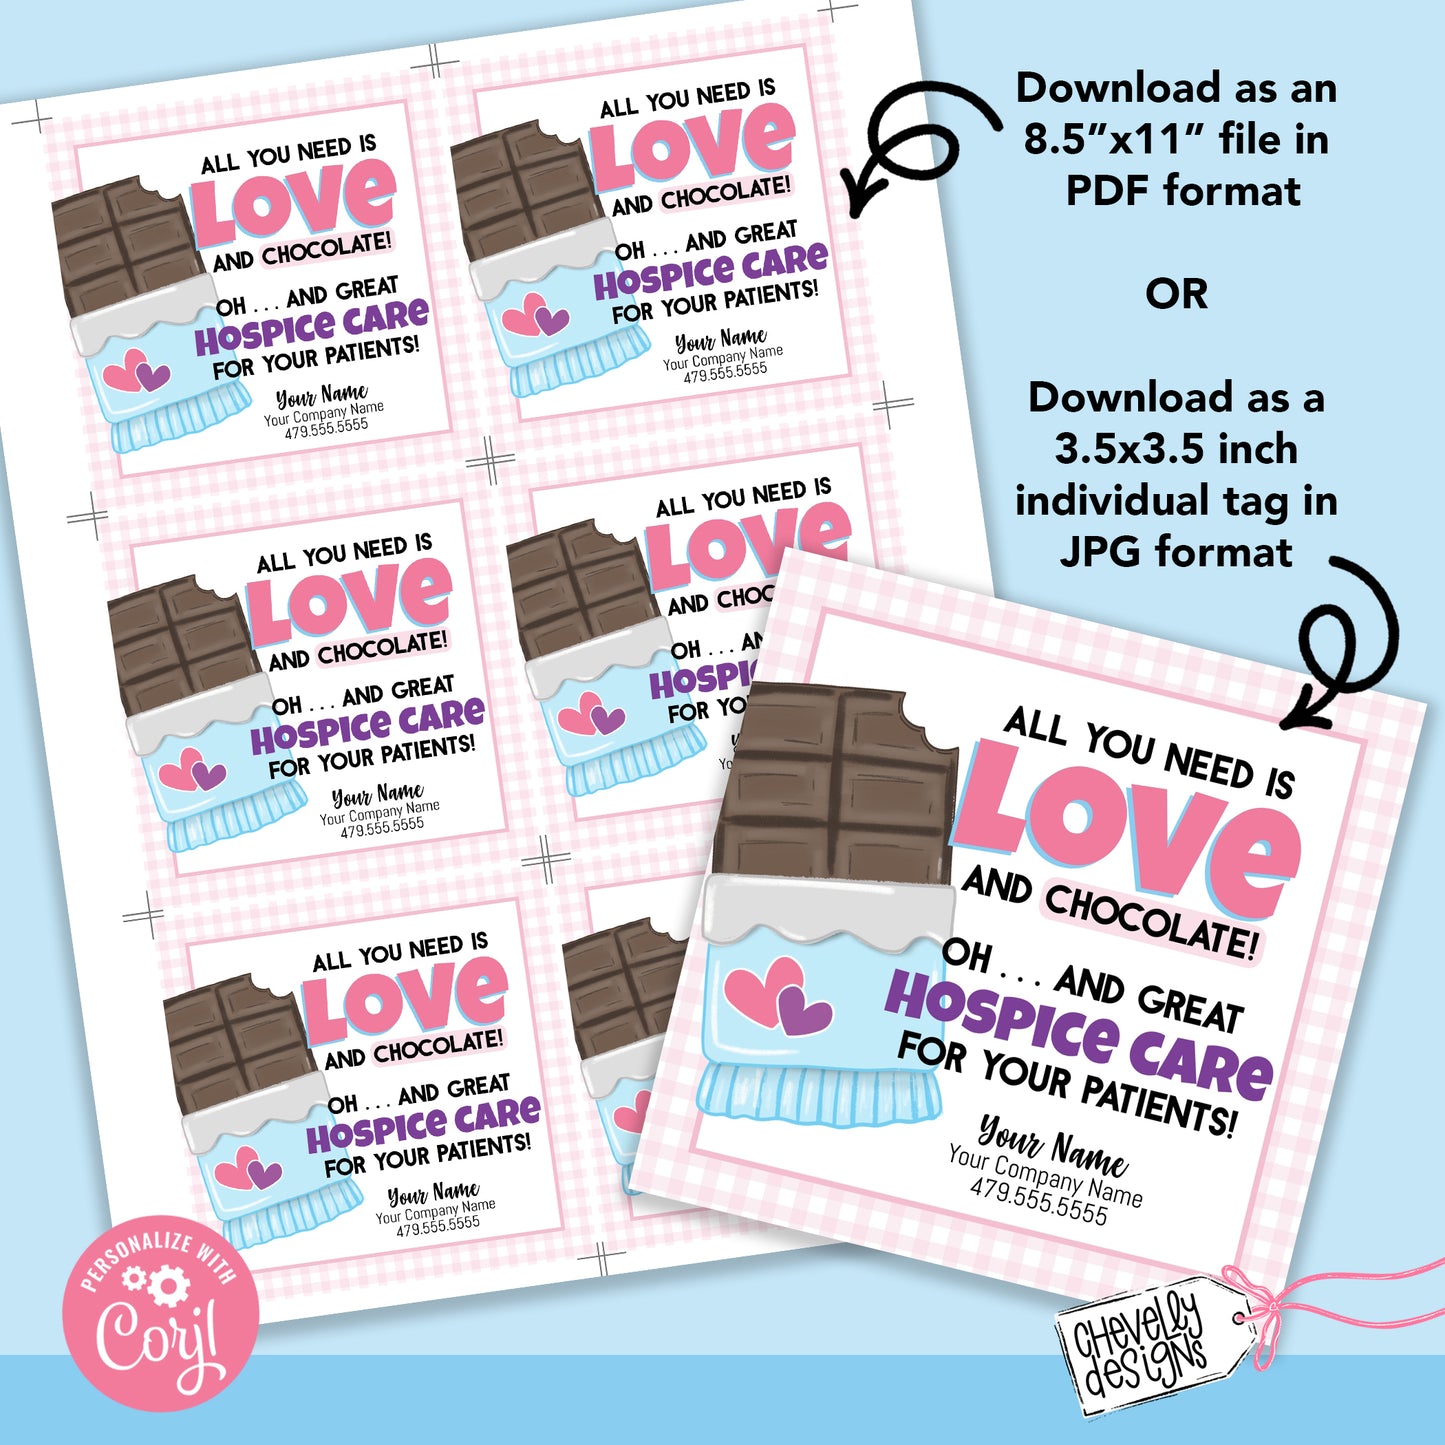 EDITABLE - All you need is love and chocolate - Healthcare Referral Marketing Gift Tag - Printable Digital File